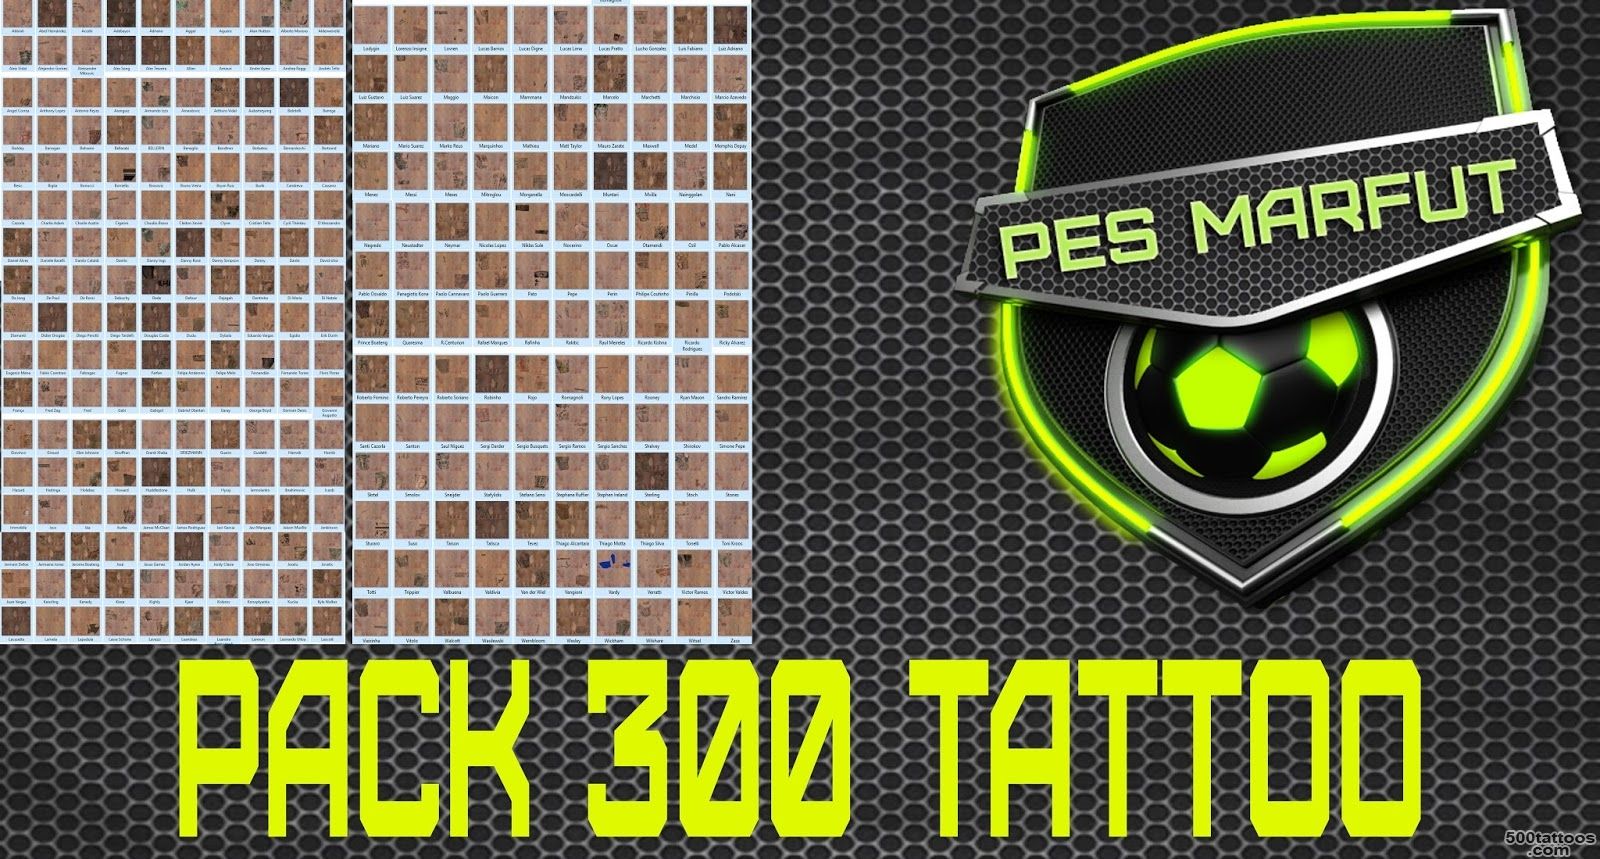 PES 2016 Tattoo Pack 300 by Marc?u   PES Patch_27